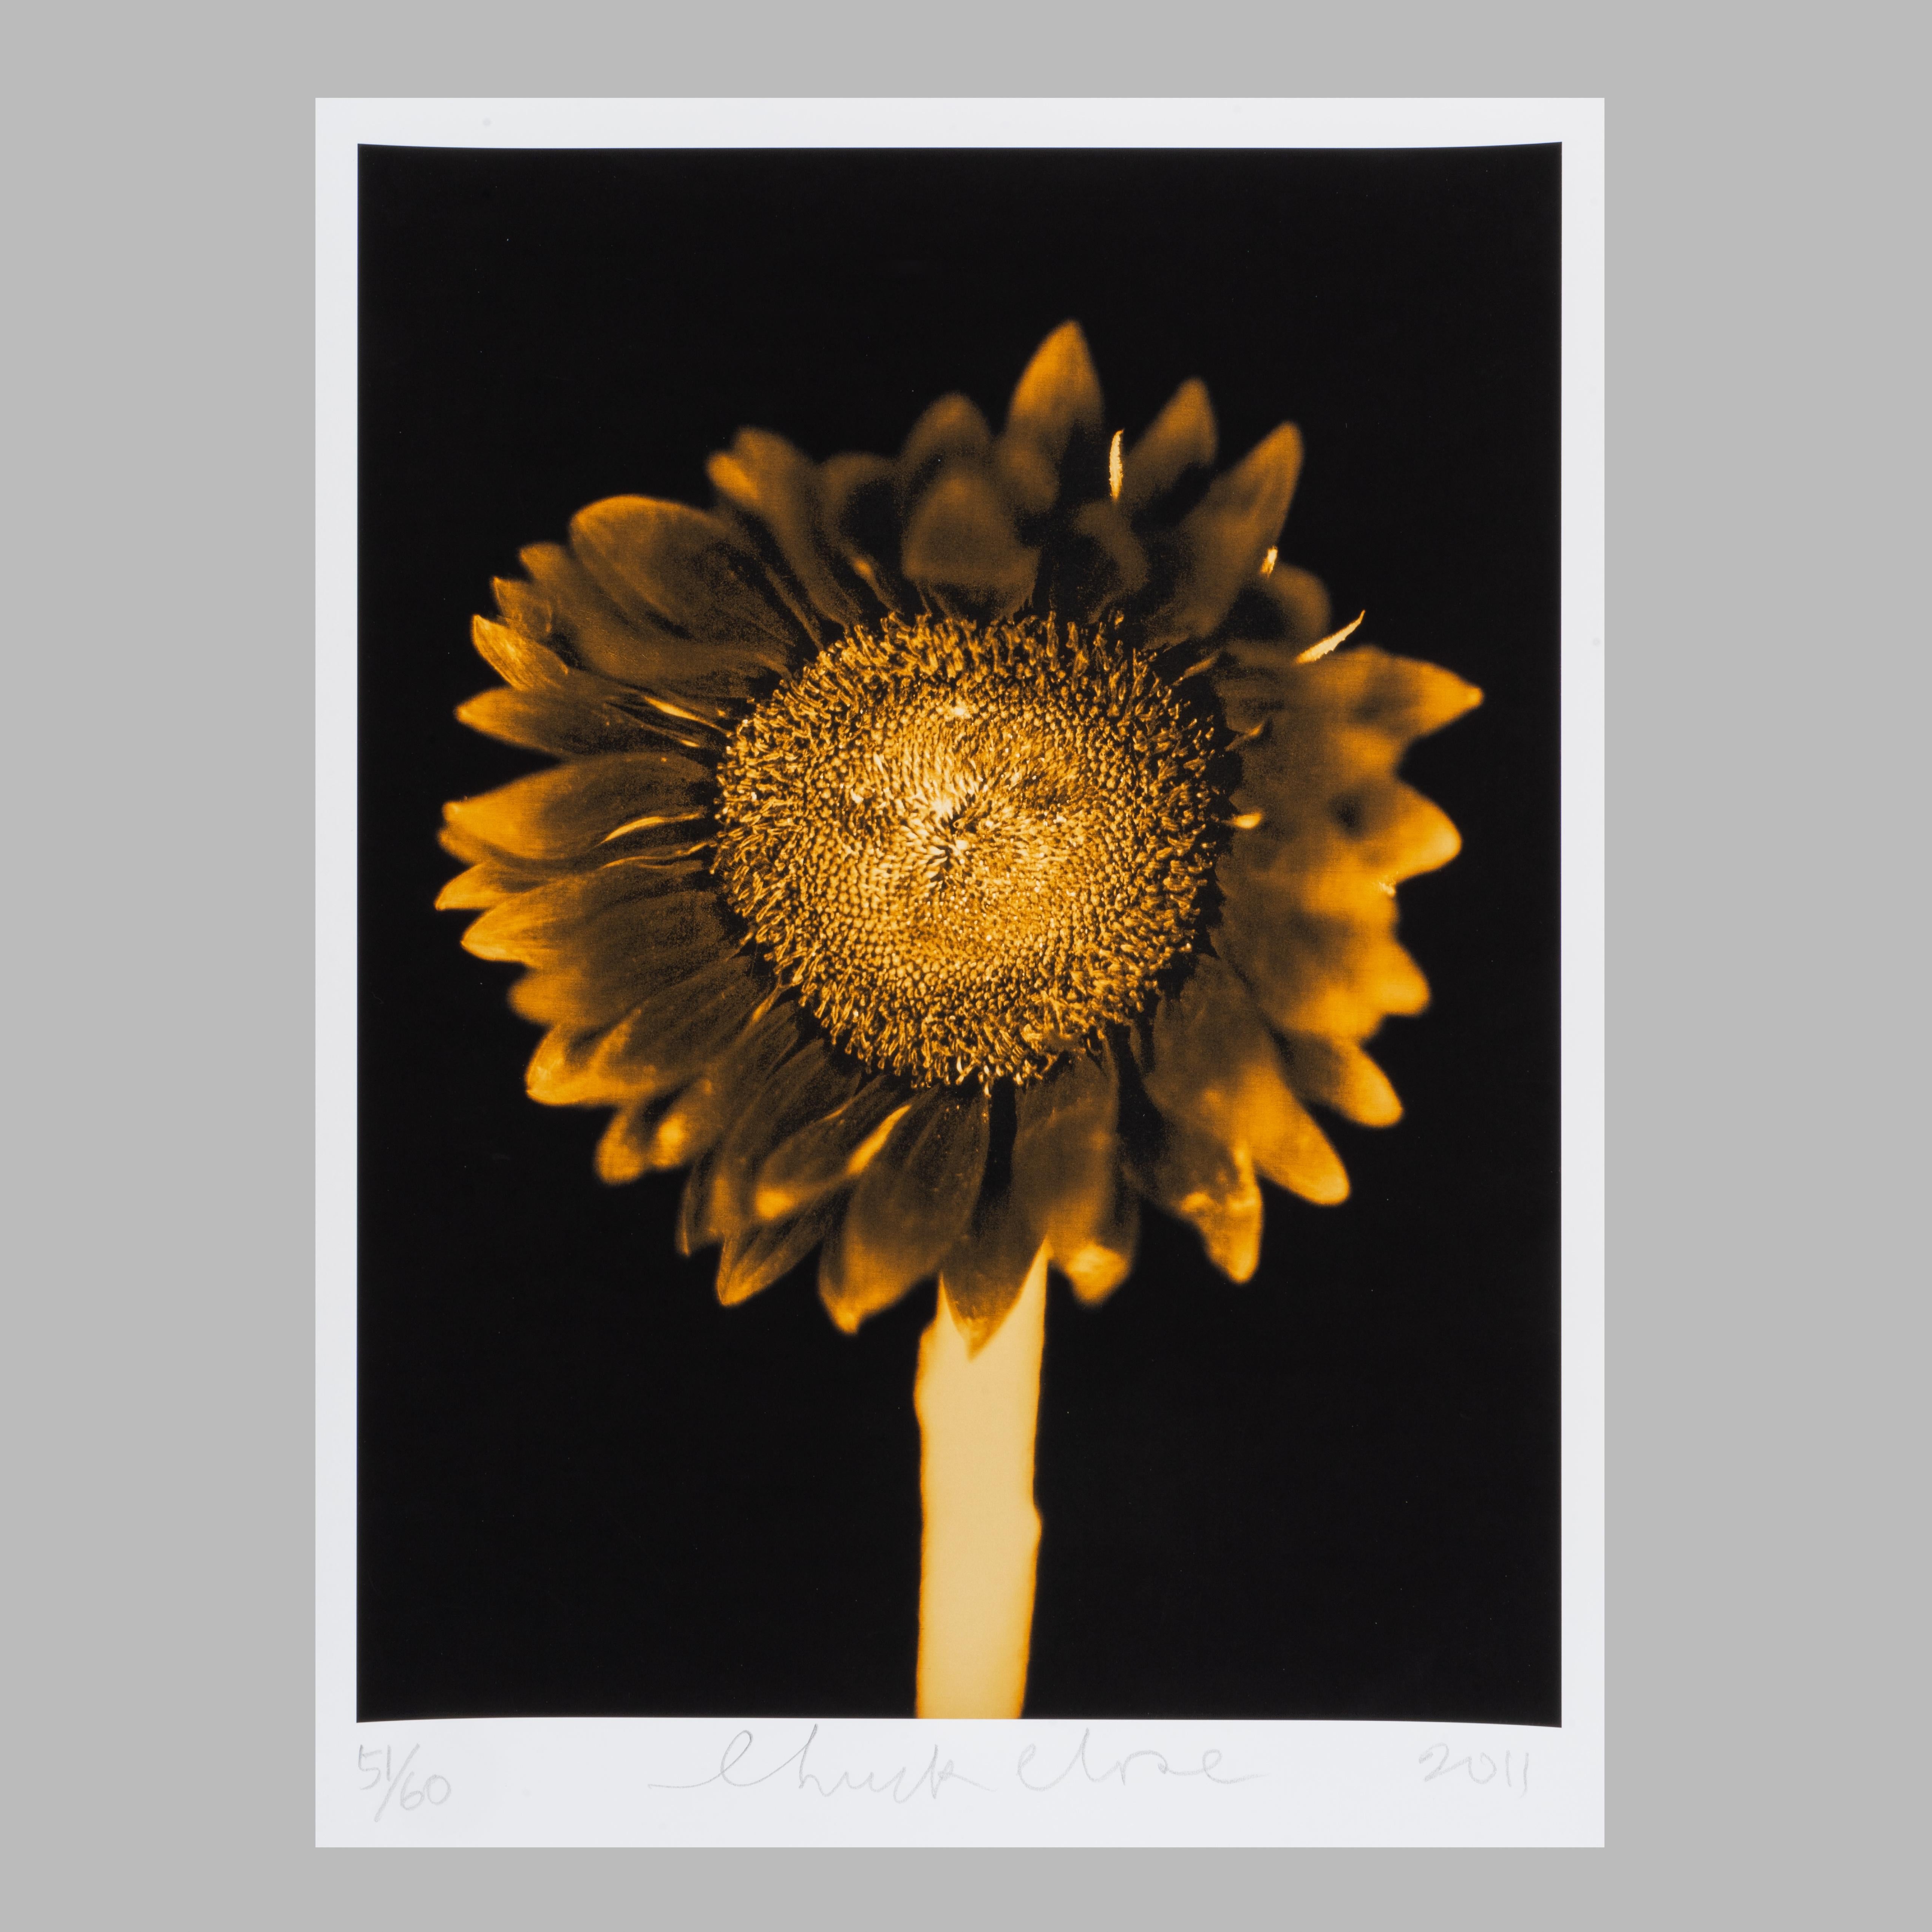 Chuck Close
Untitled (Sunflower), 2011
Pigment Print
Edition of 60 
52 x 39 cm (20.4 x 15.3 in)
Signed, numbered and dated in pencil on the front
Accompanied by Certificate of Authenticity
In mint condition, as acquired from the publisher
The piece